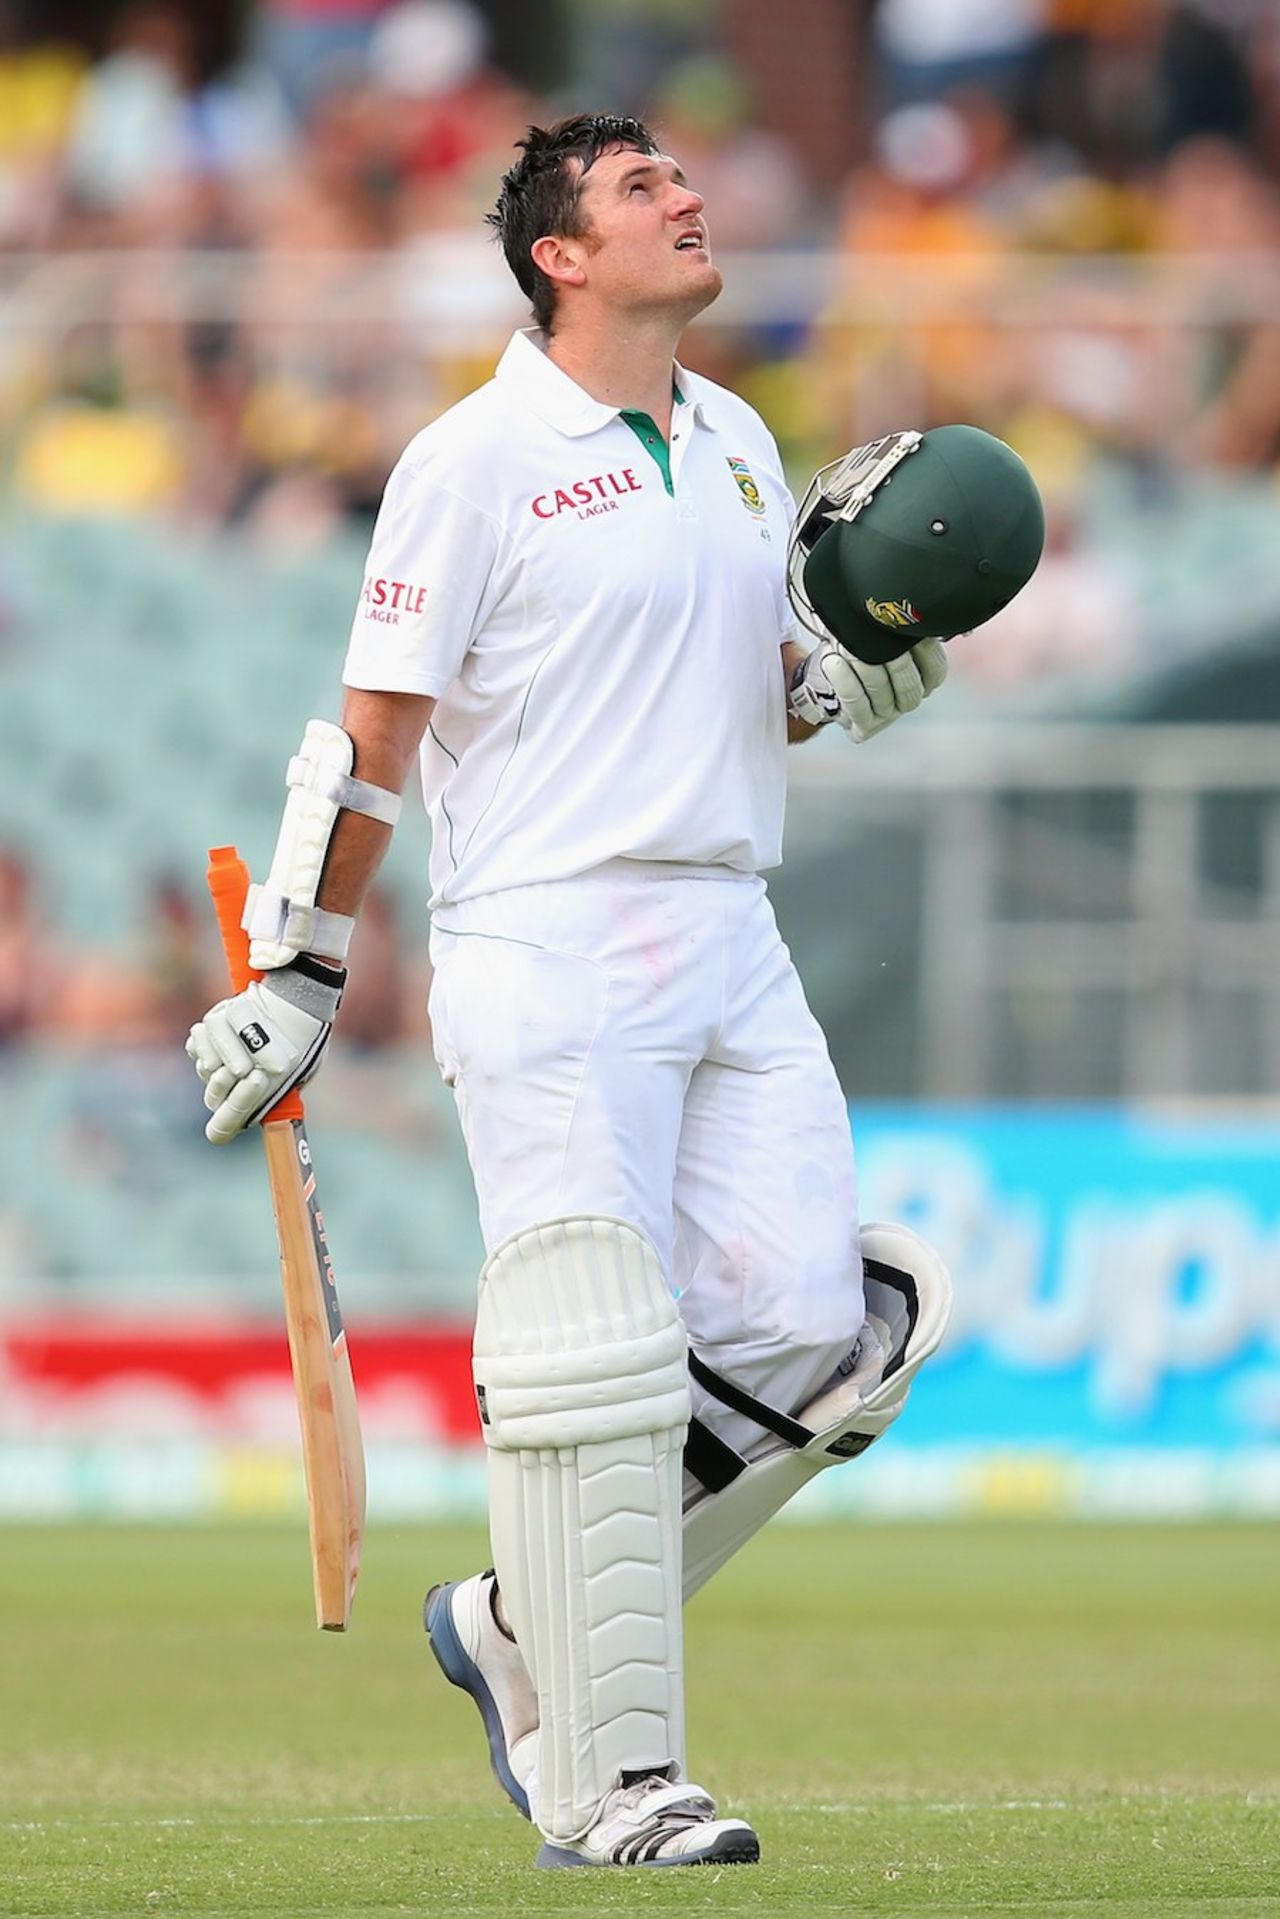 Graeme Smith brought up his 26th Test century, Australia v South Africa, 2nd Test, Adelaide, 2nd day, November 23, 2012